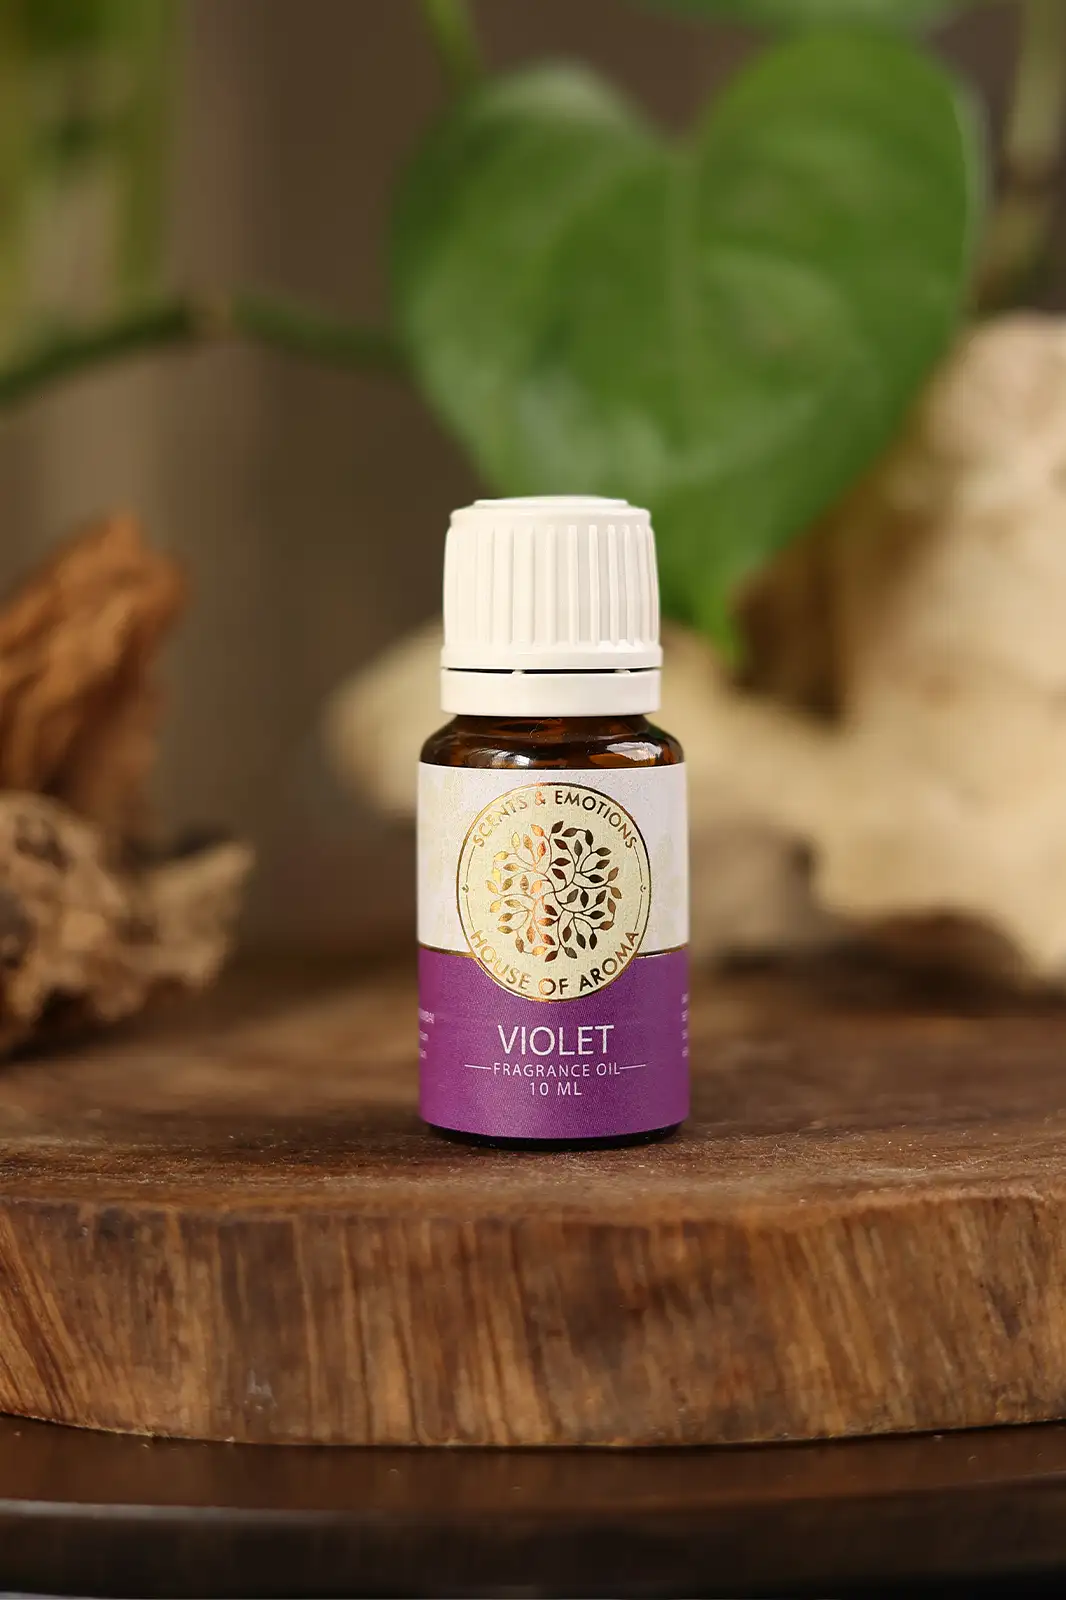 Fragrance Oil, Aroma oil, Synthetic oils, Fragrance oil for candles, oil for diffusers, Aromatic oil, Candle oil, Aromatherapy oil, oil manufacturers, House of Aroma, violet fragrance oil, violet fragrance, violet lime fragrance oil, violet fragrantica, bergamot violet fragrance oil, violet sparkle fragrance oil, violet candle fragrance oil, violet-scented oil, sweet violet fragrance oil, violet leaf fragrance oil, violet floral aroma oil